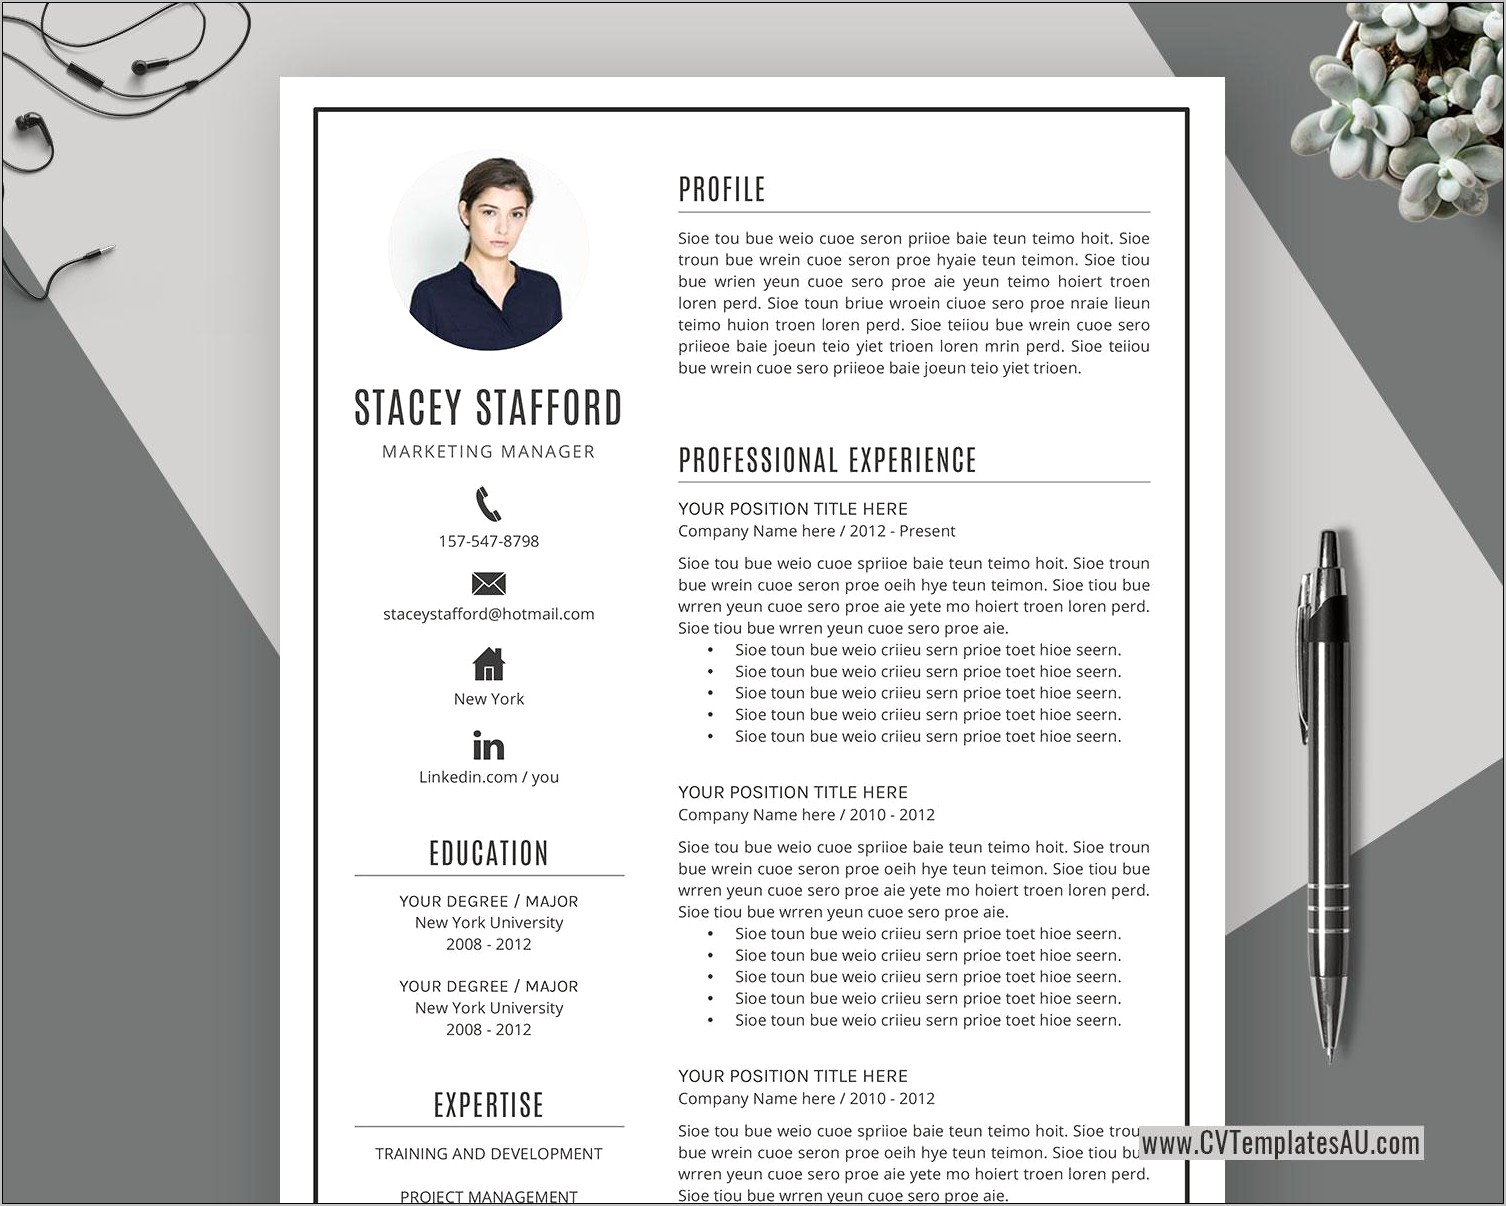 Resume Templates For Experienced It Professionals Download